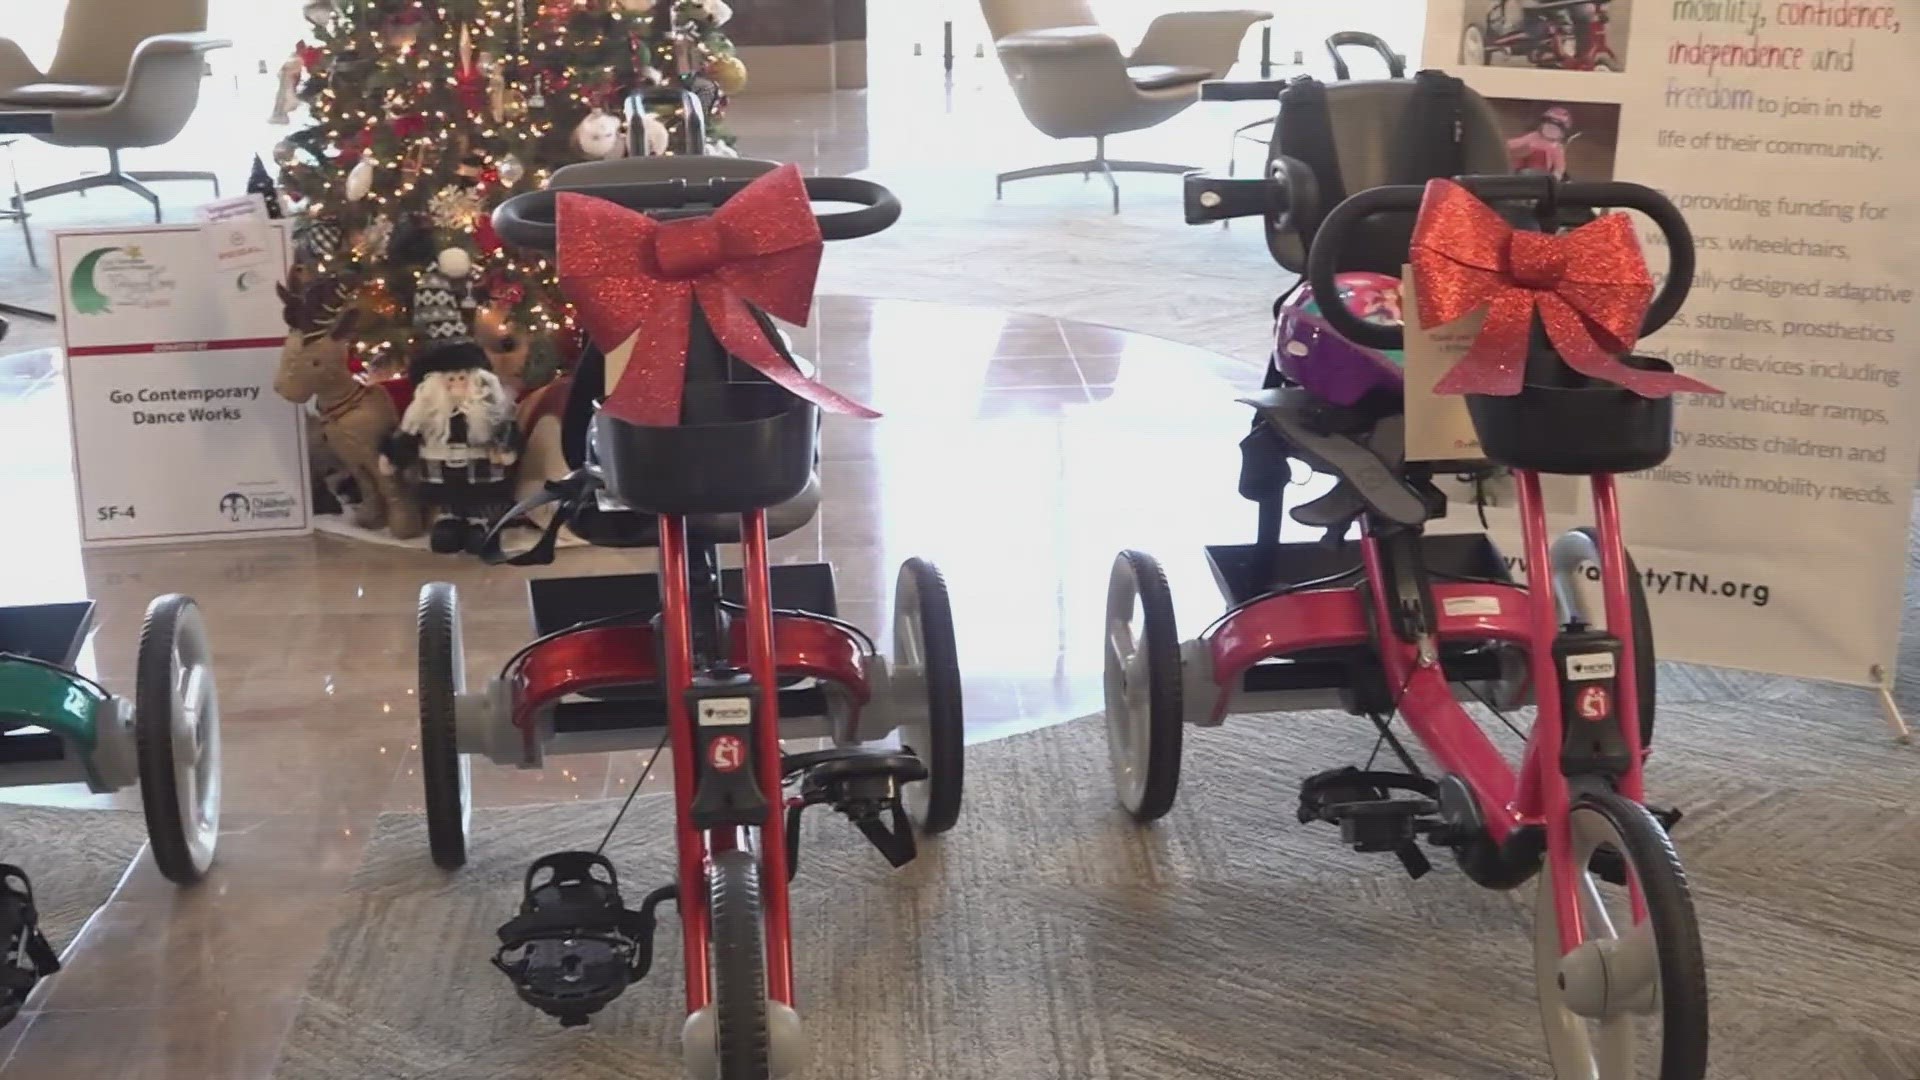 A nonprofit that works to help children across the world gave four East TN children special equipment that helps make sure they can stay active and independent.